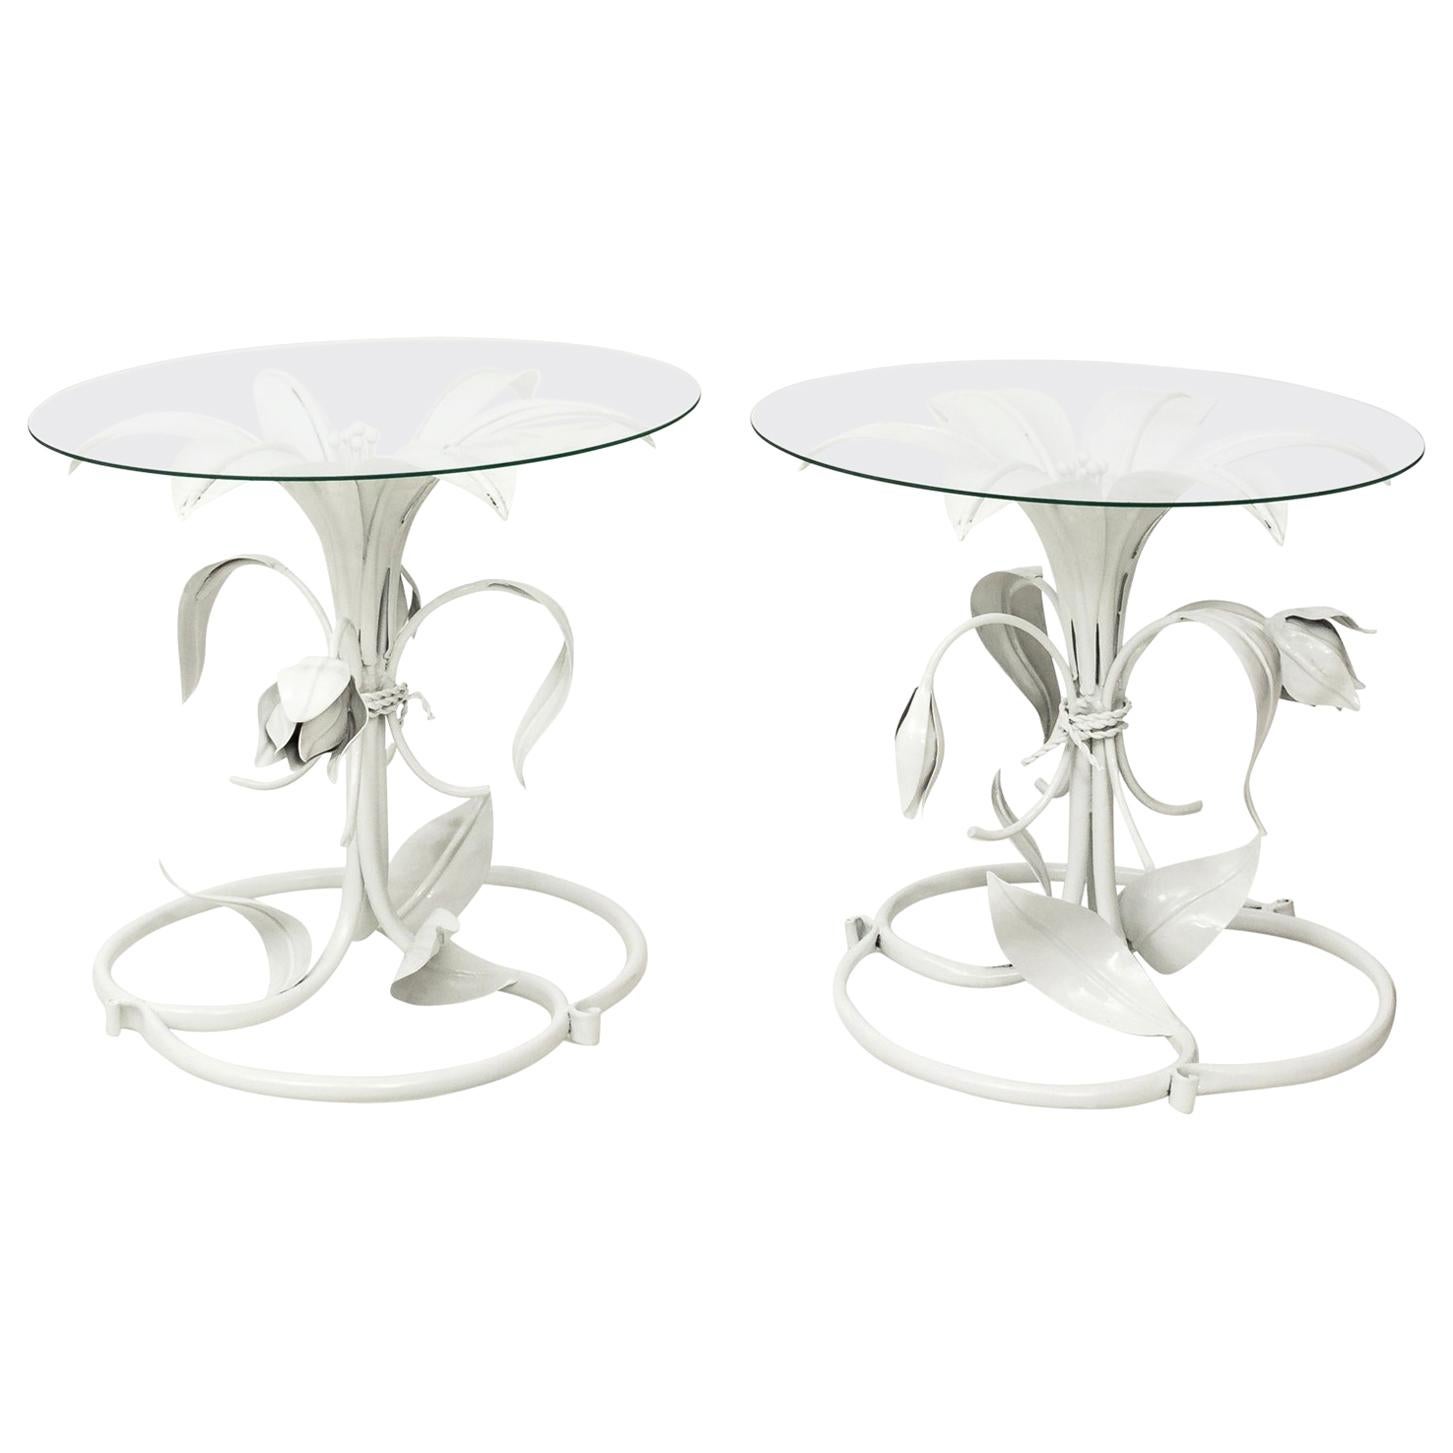 Pair of White Lacquered Arthur Court Side Tables